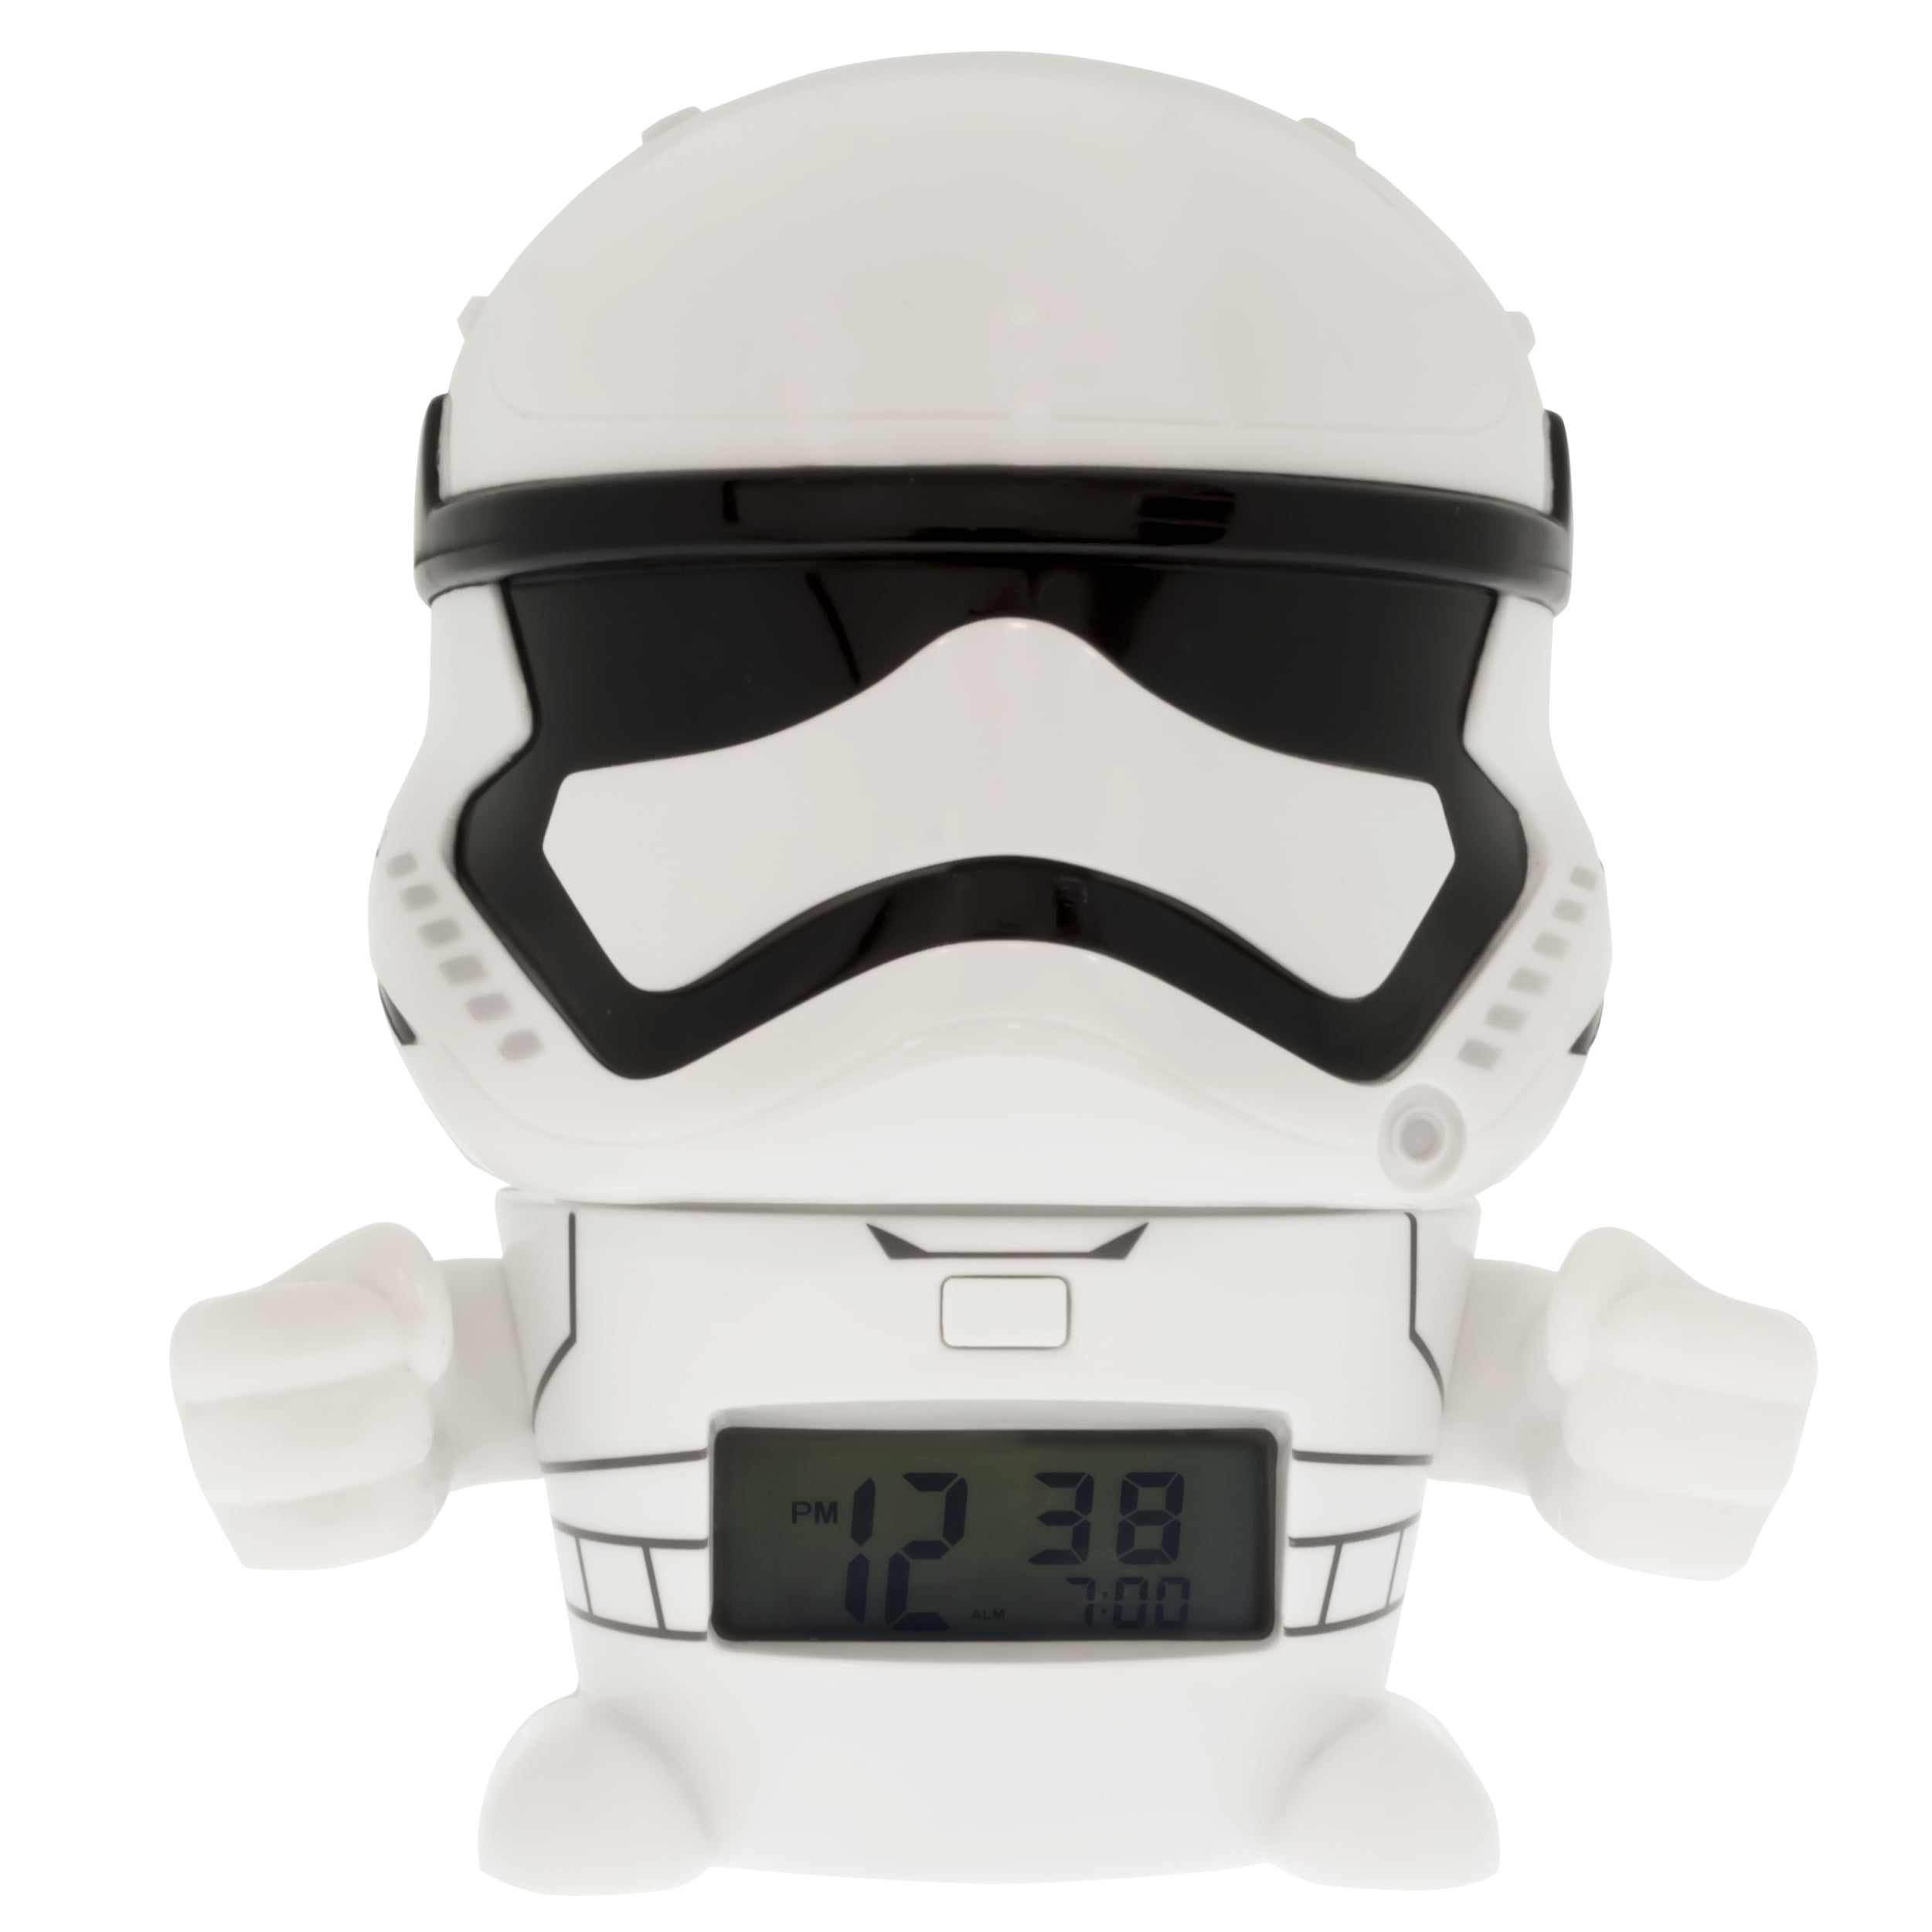 black/grey BulbBotz Star Wars 2021388 The Last Jedi Kylo Ren Kids Night Light Alarm Clock with Characterised Sound 5.5 inches tall boy girl official plastic LCD display